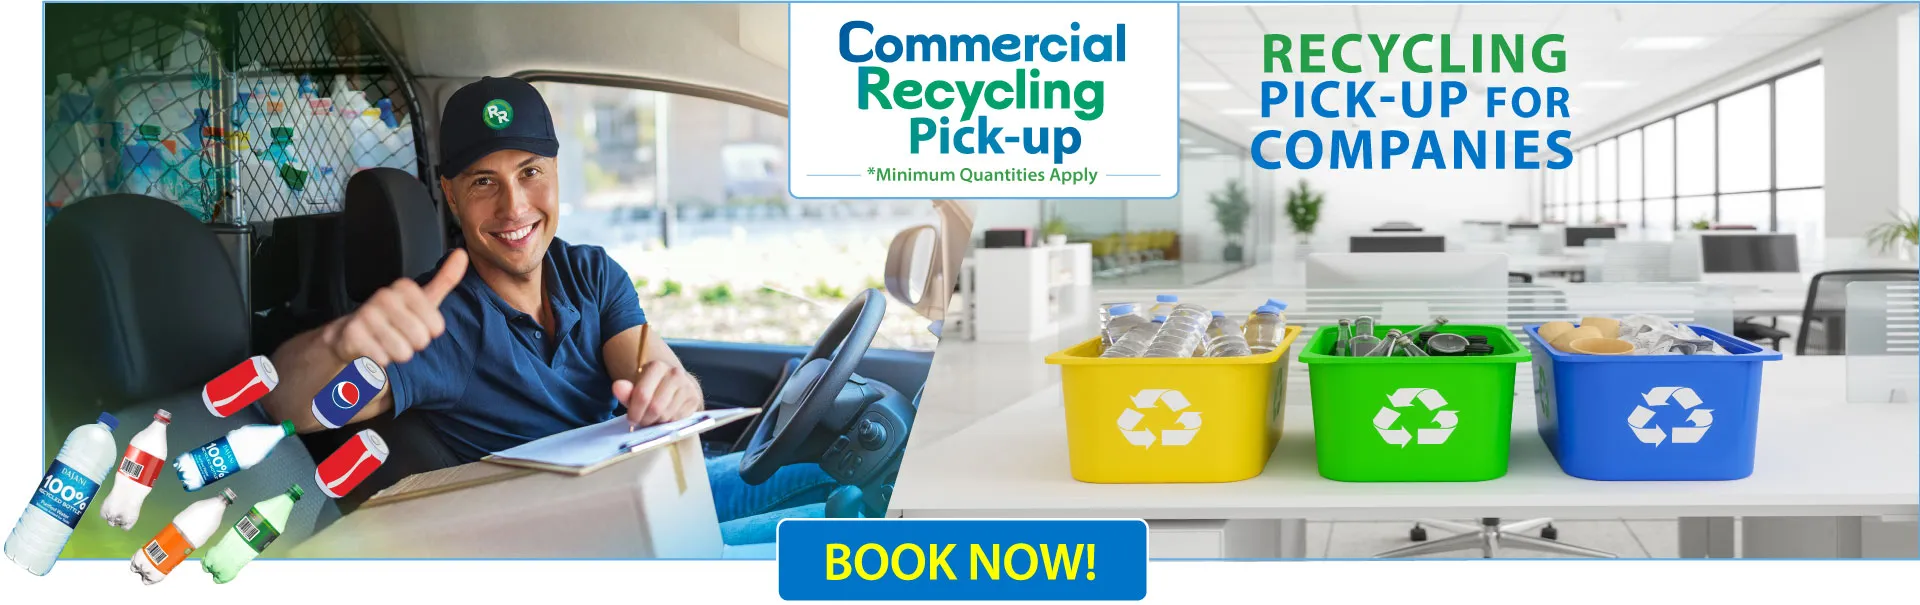 Commercial Recycling Pickup